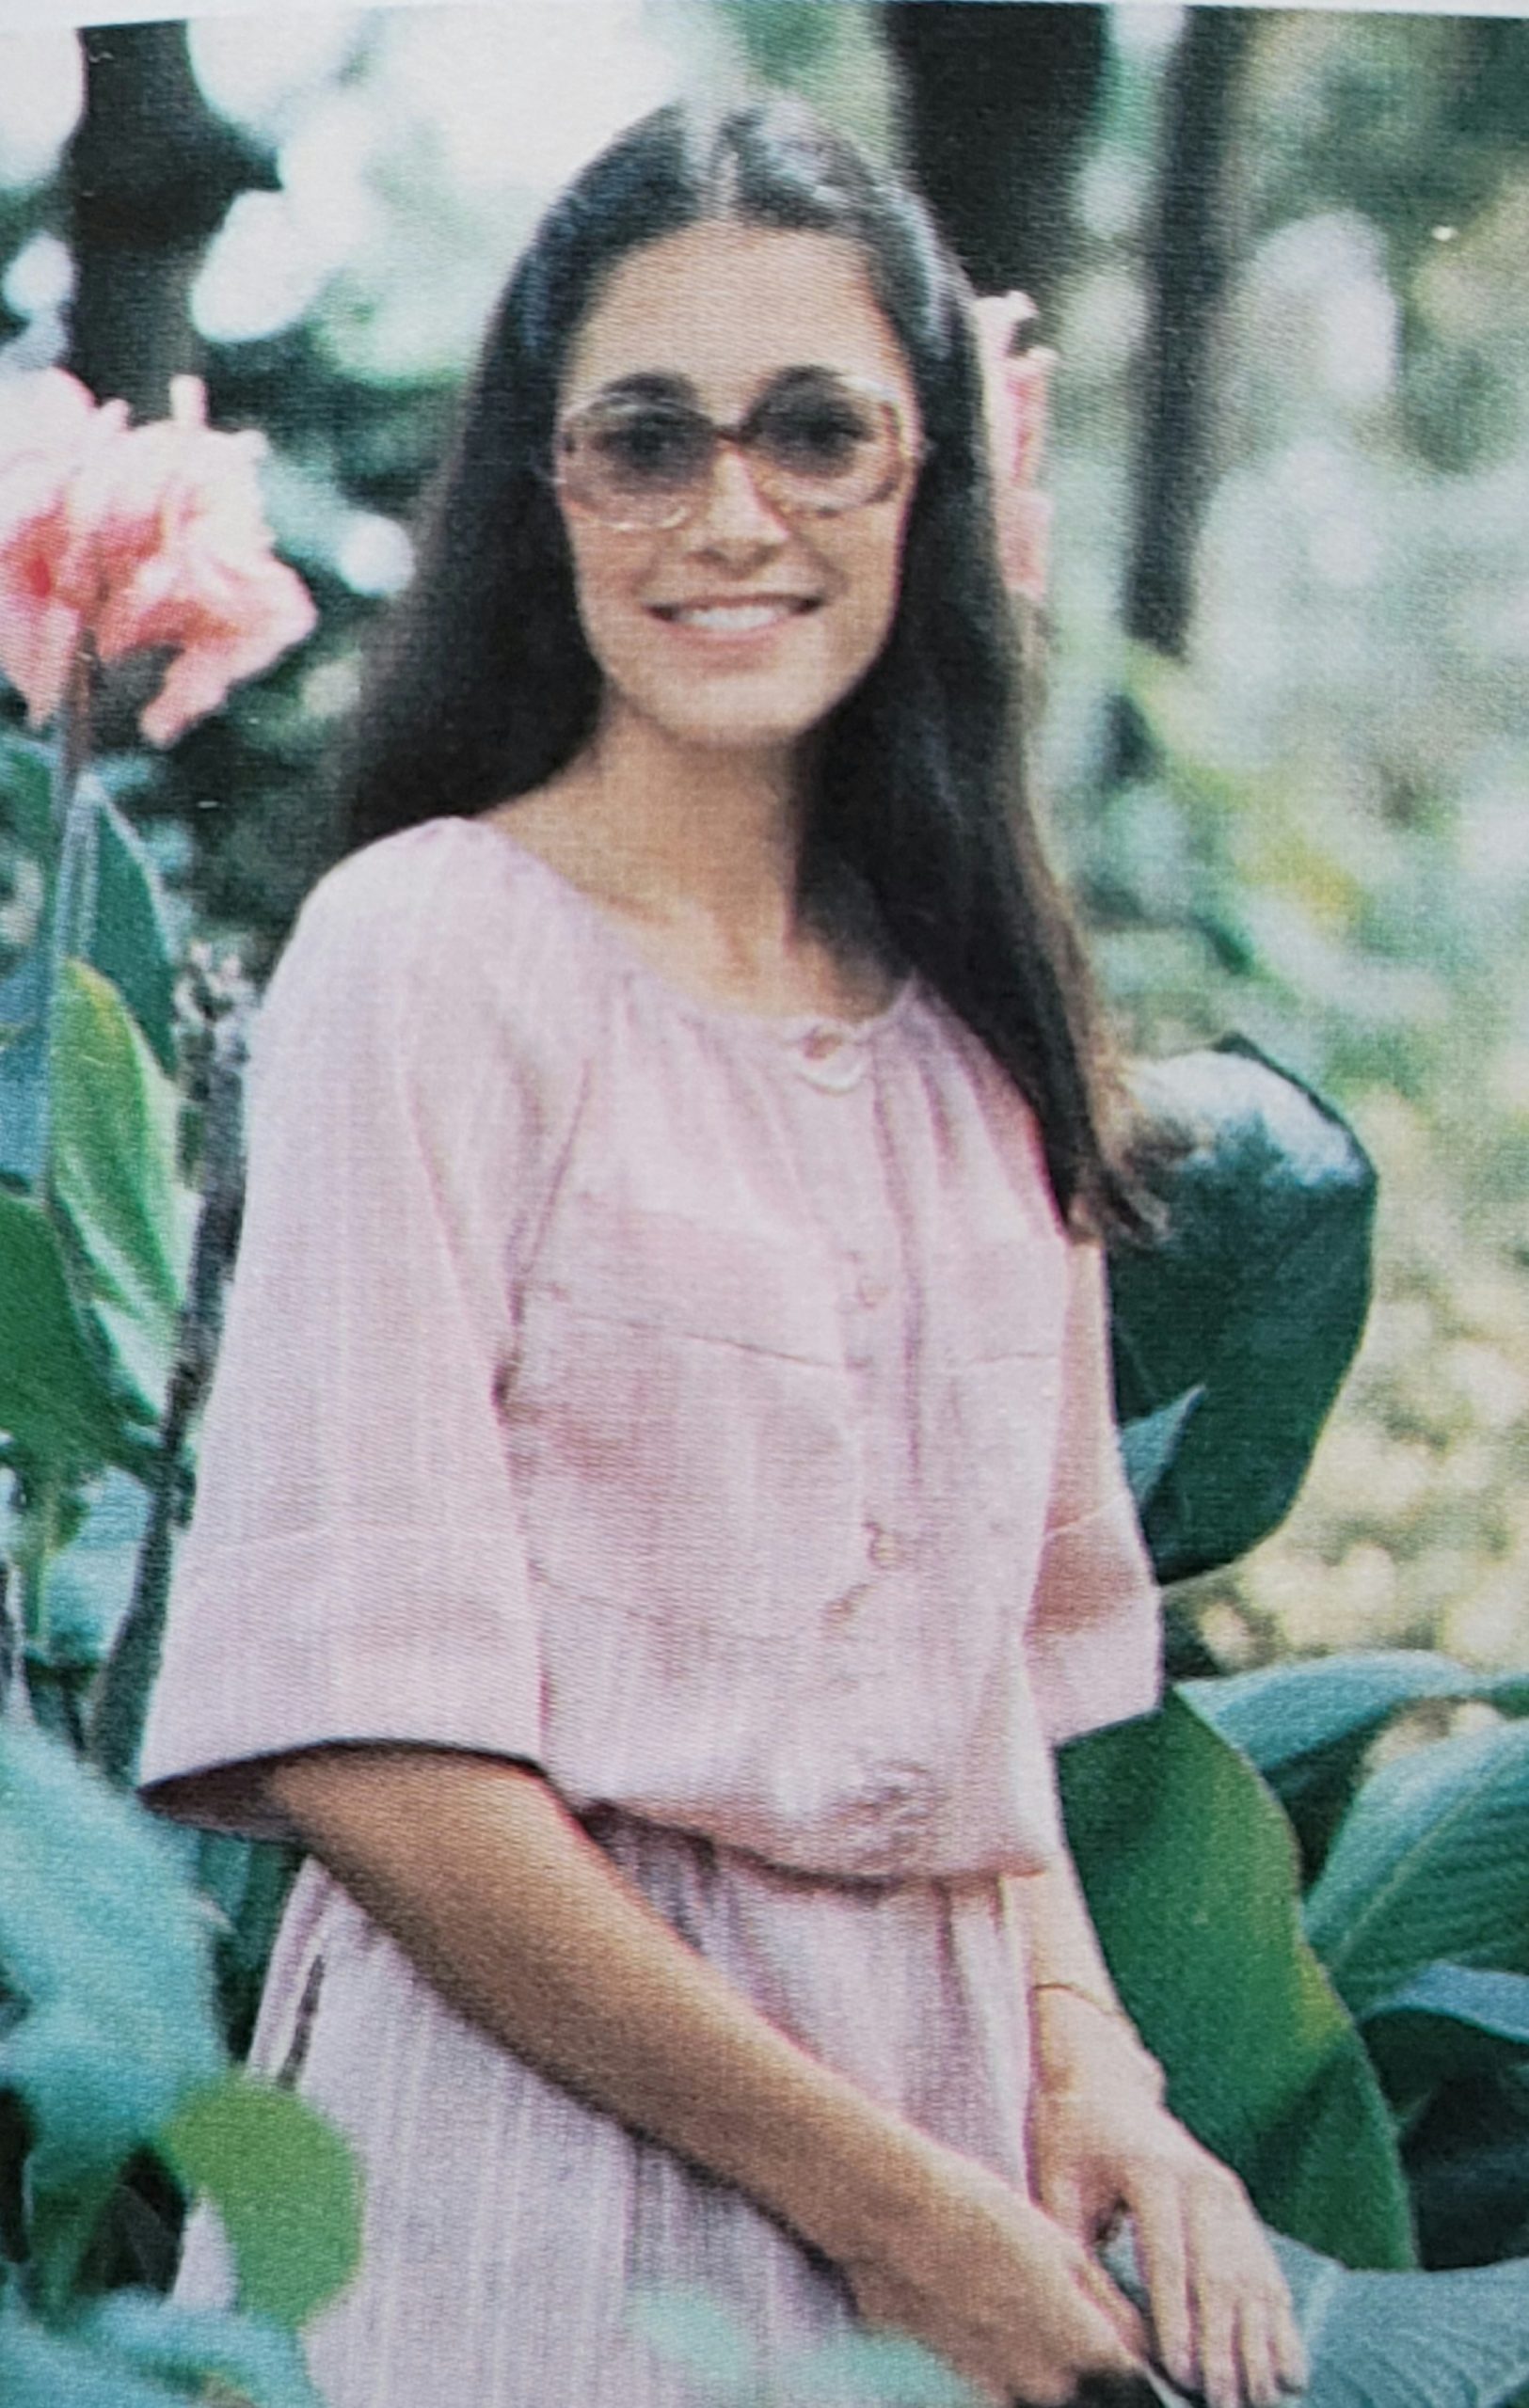 Image: Teenaged girl from 70's with glasses.